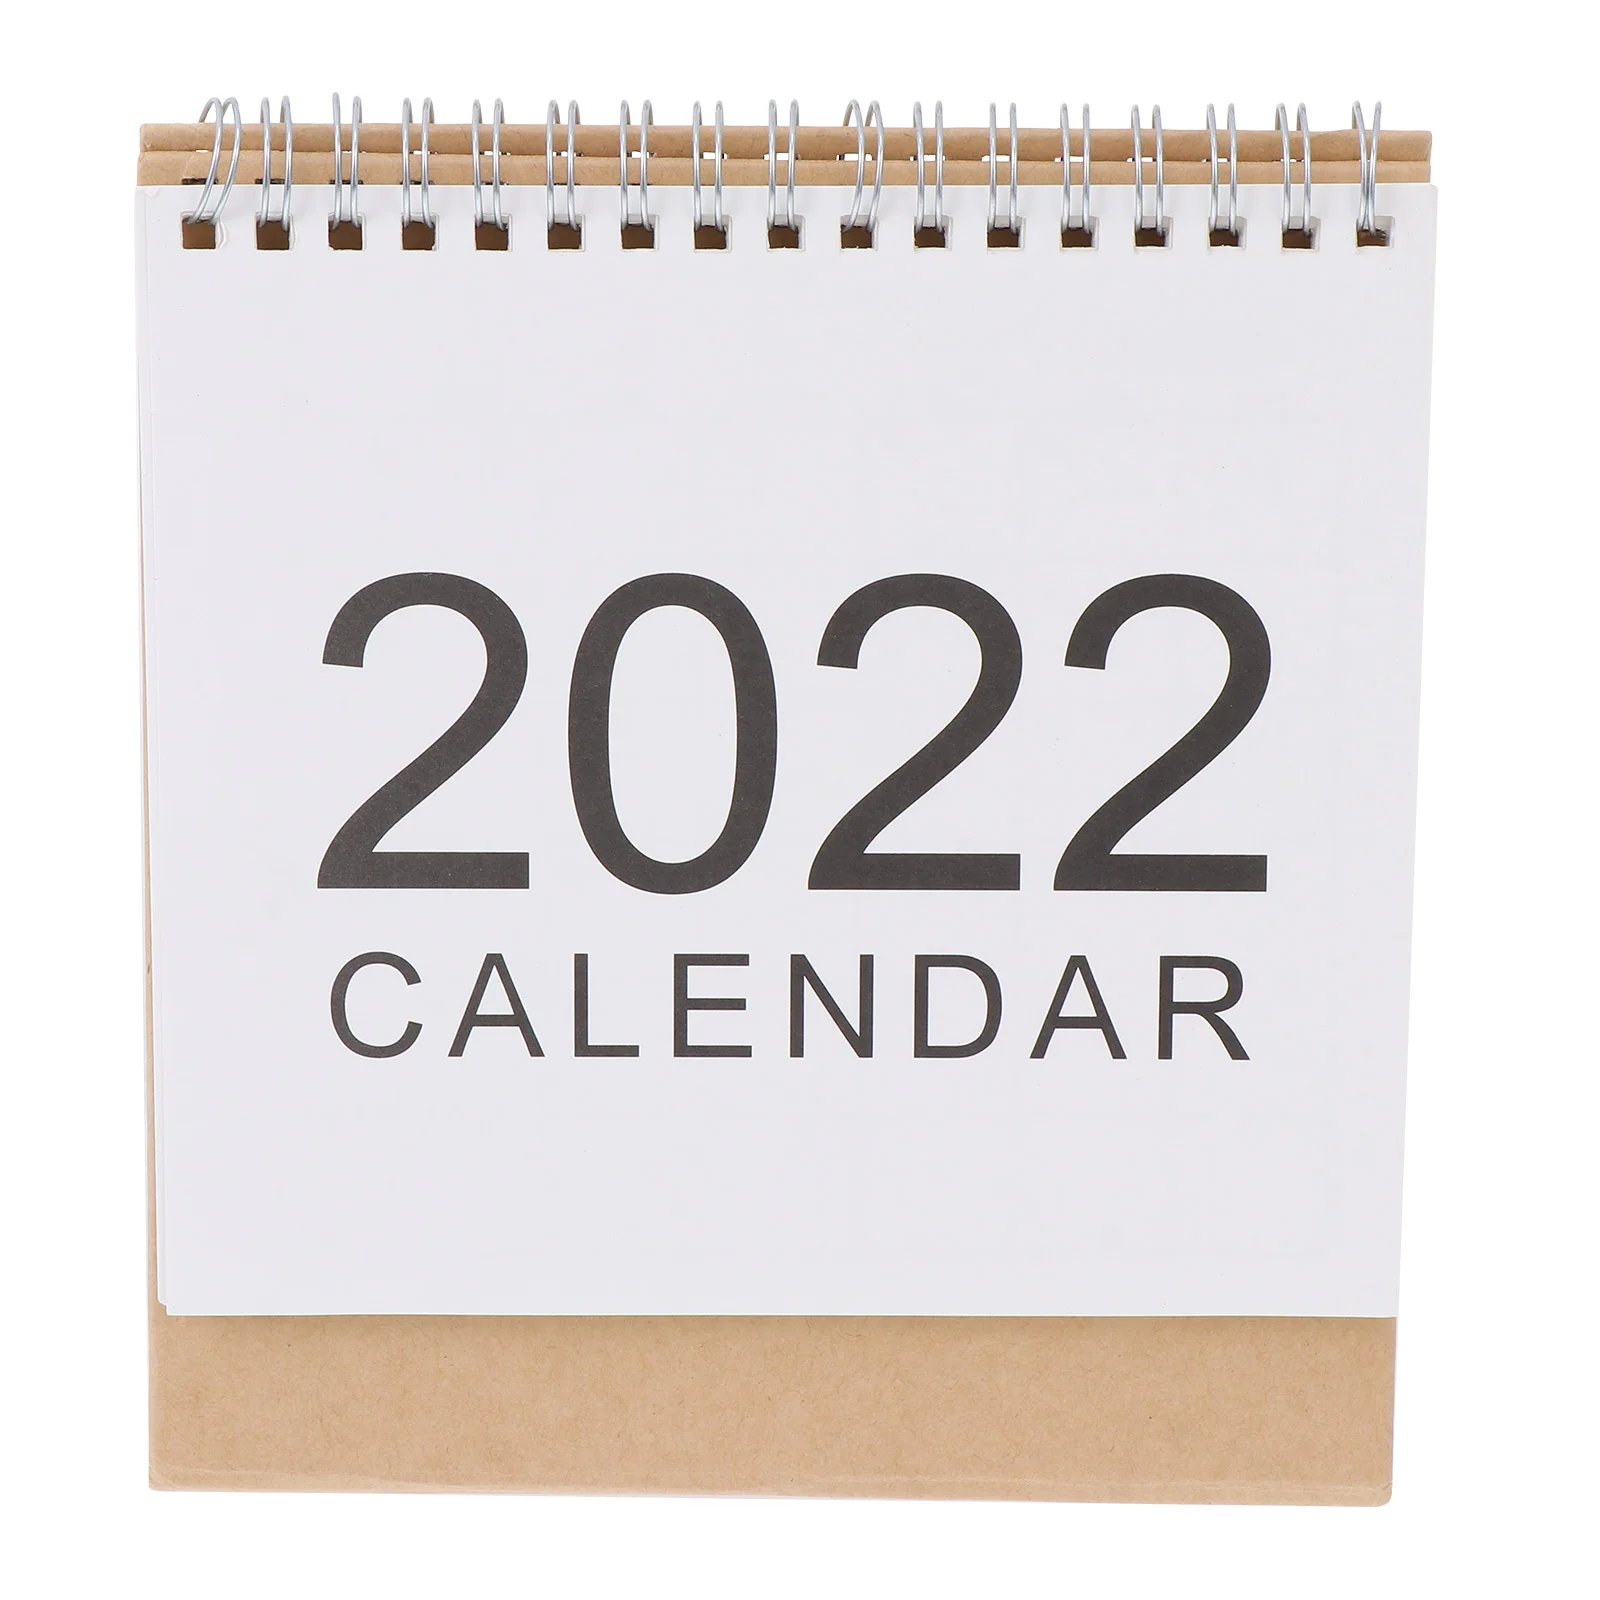 

Calendar Desk Planner Monthly Office Standing Mini Note Taking Weekly 2022 Blotter Notebook Calendars Concise Schedule Quote